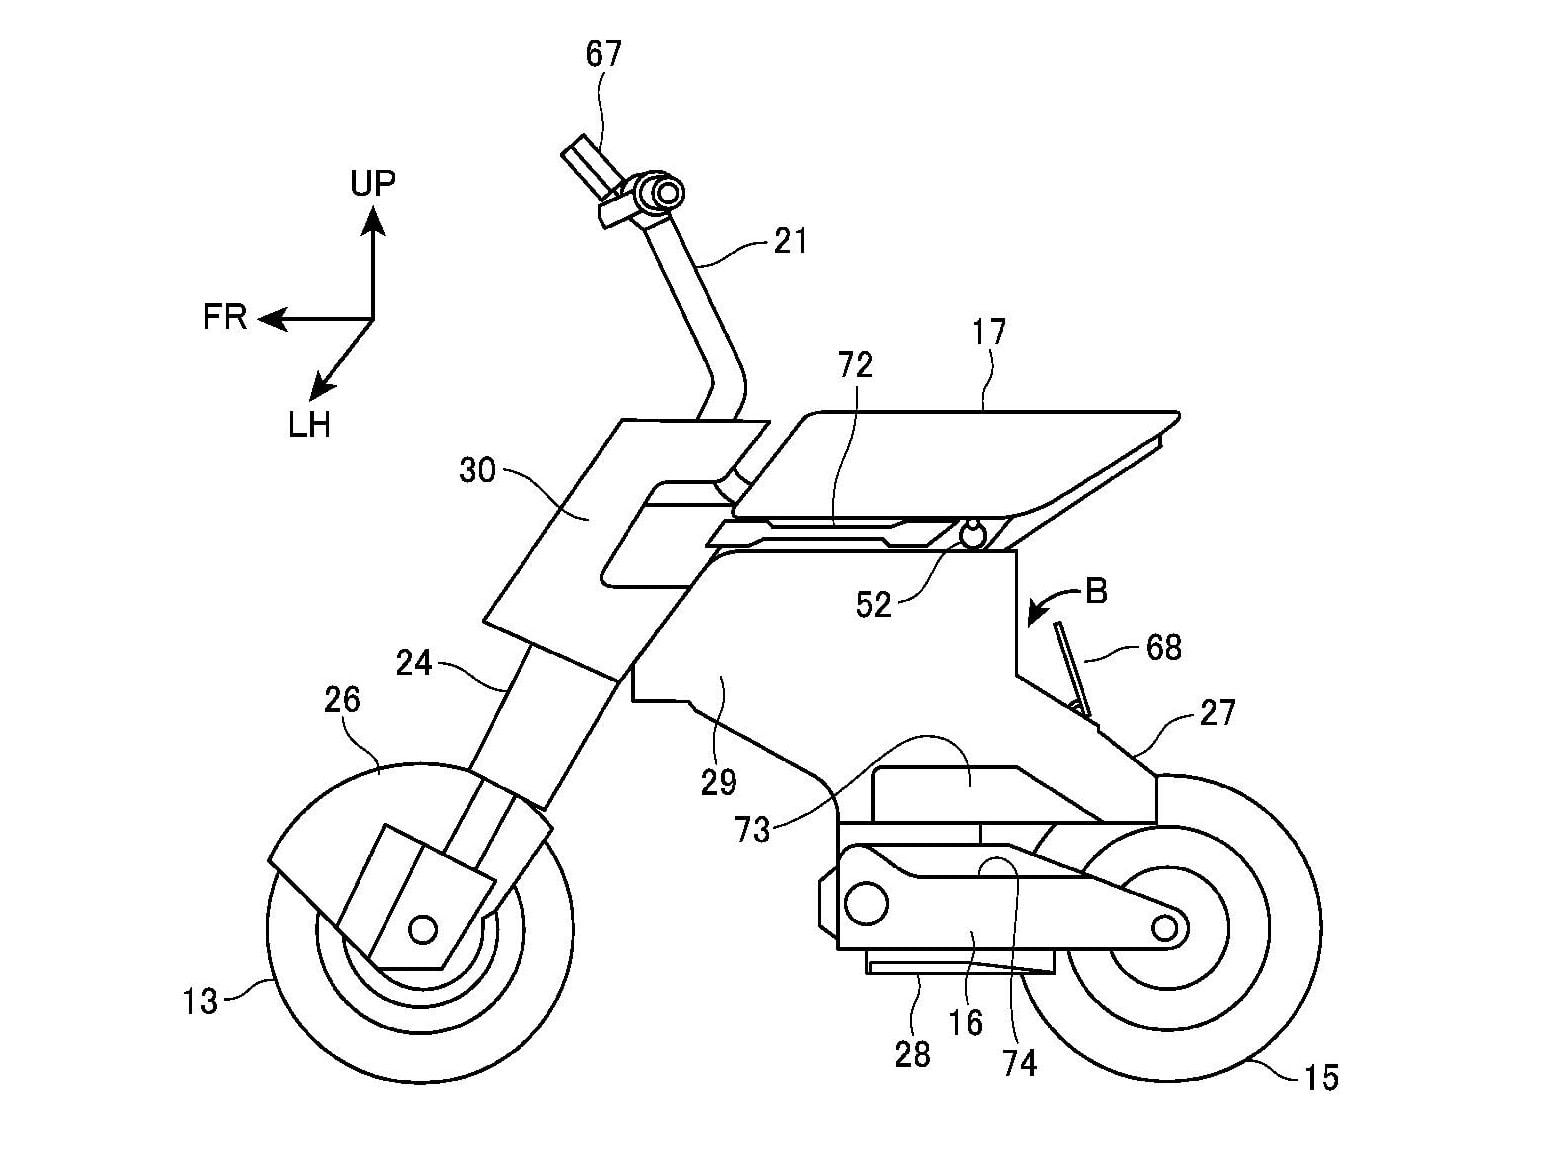 Honda has filed patent documents that show its concept micro scooter.